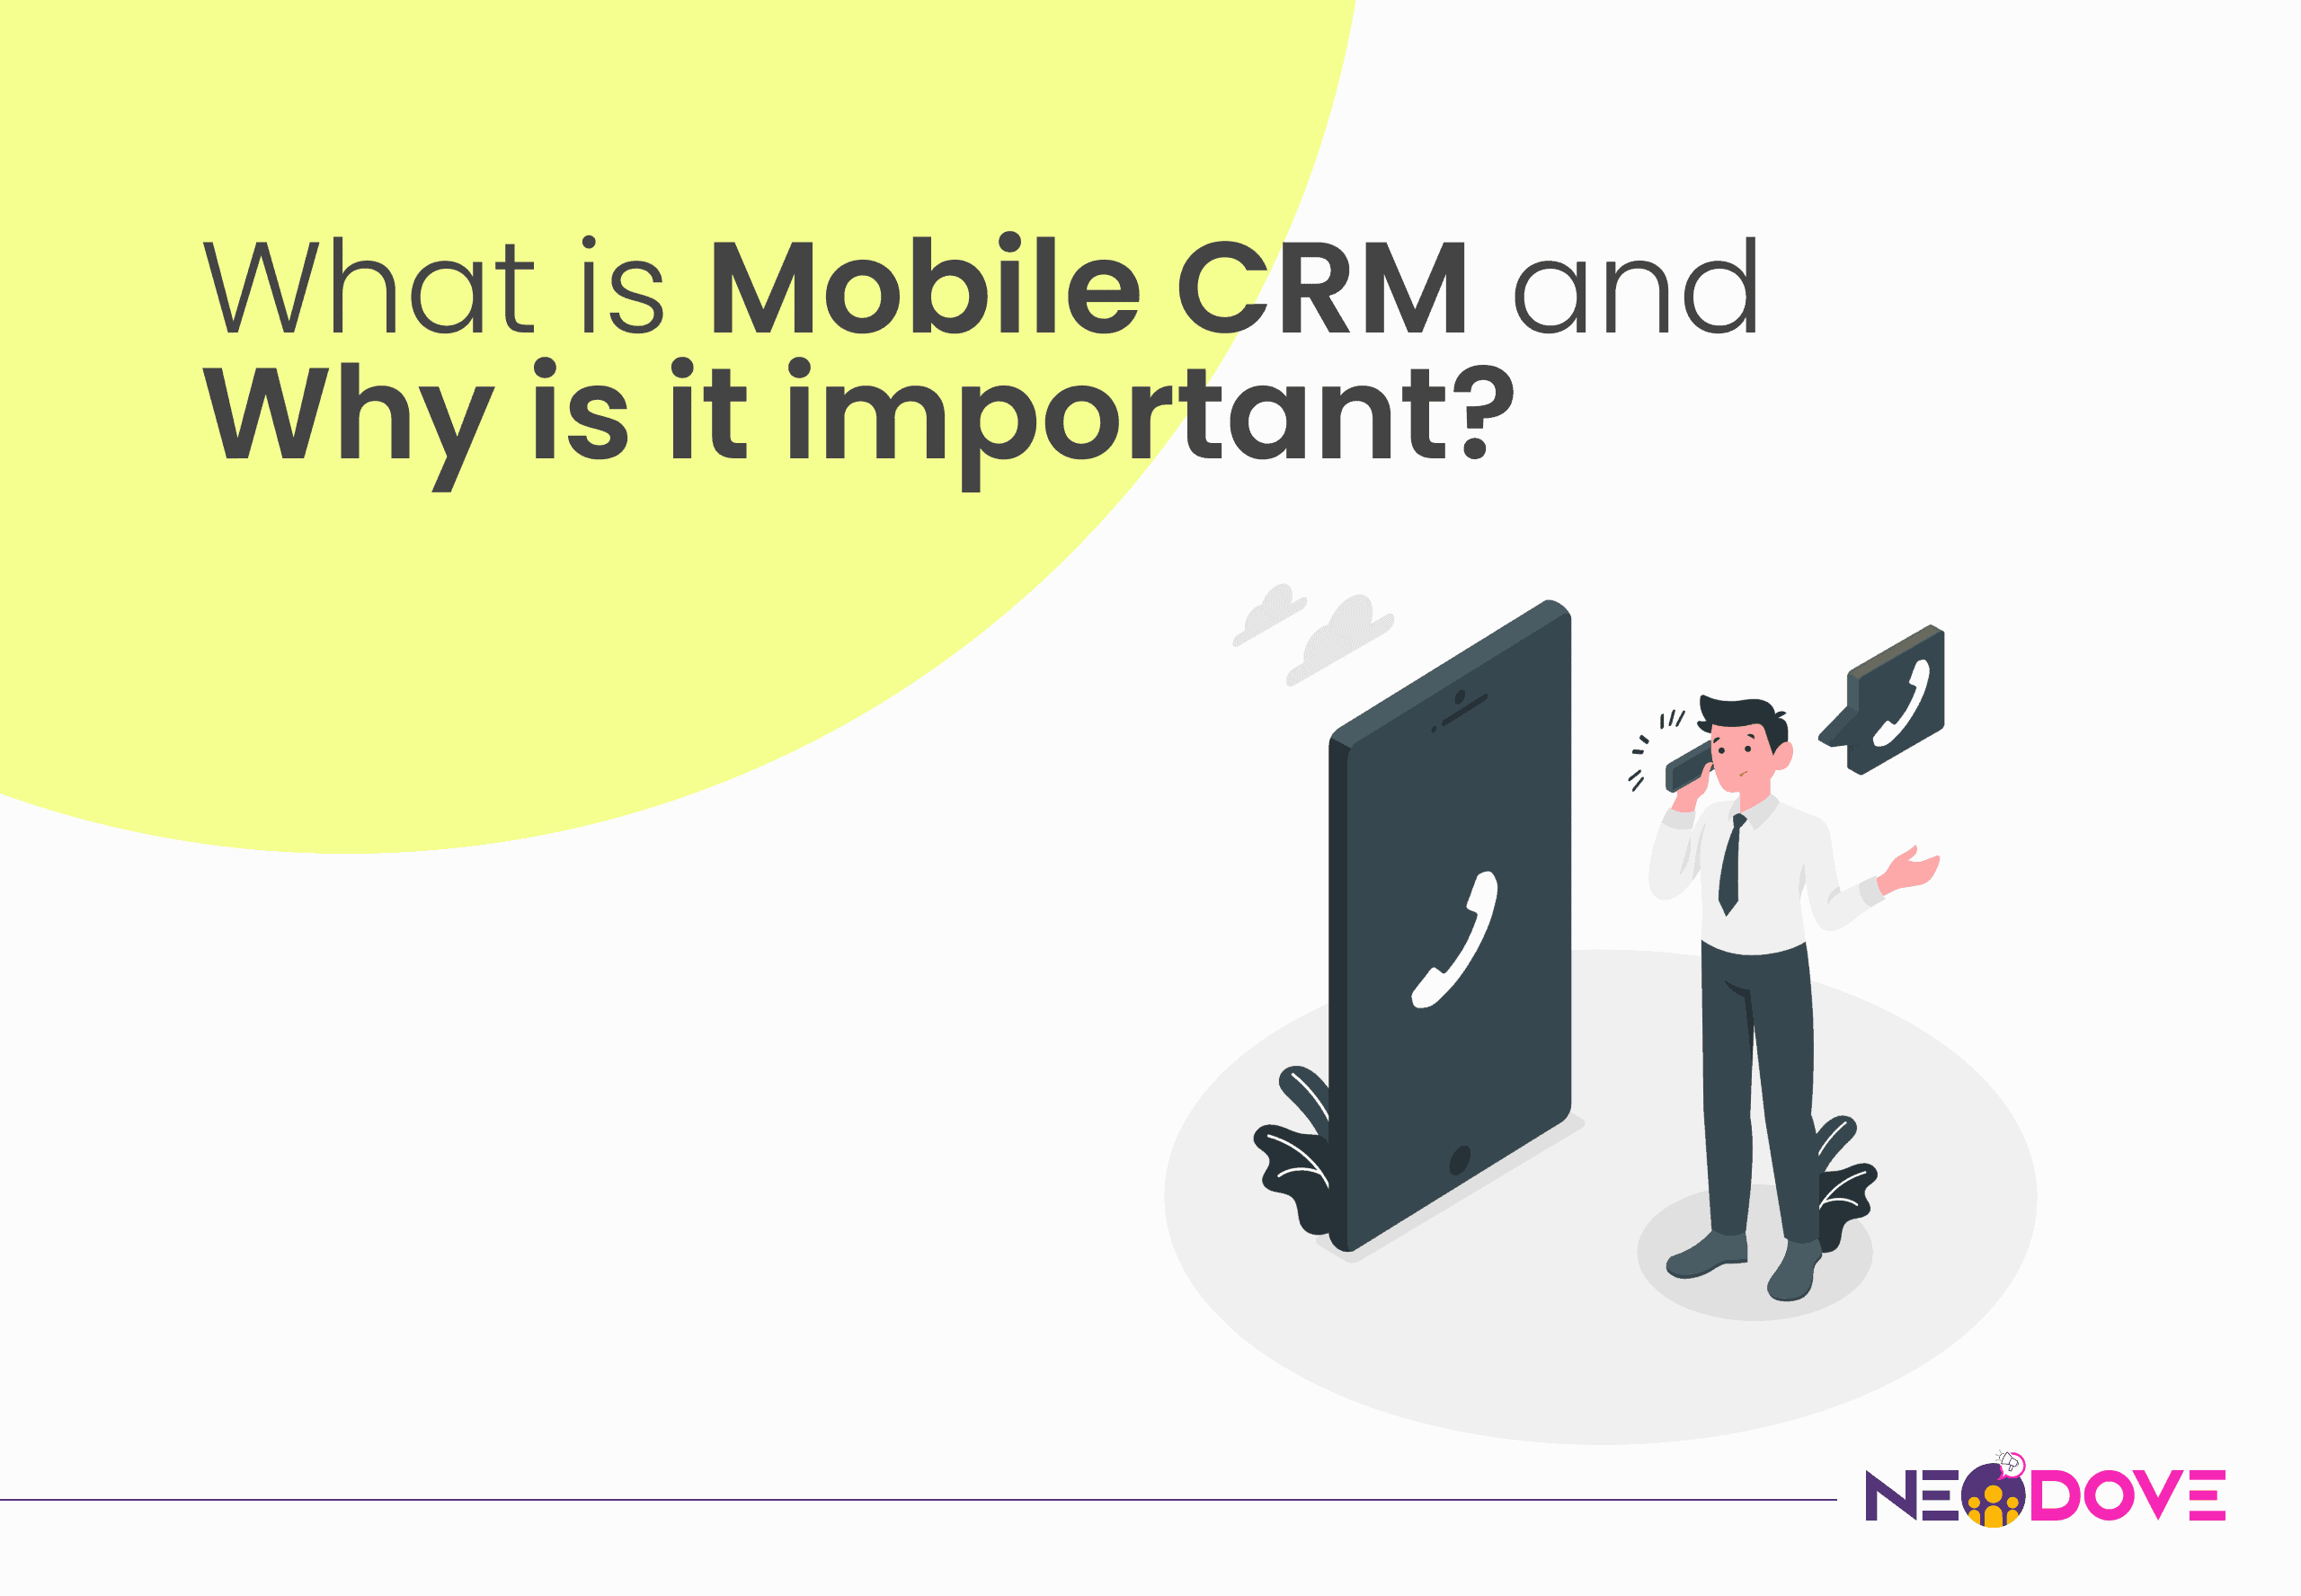 what is mobile crm